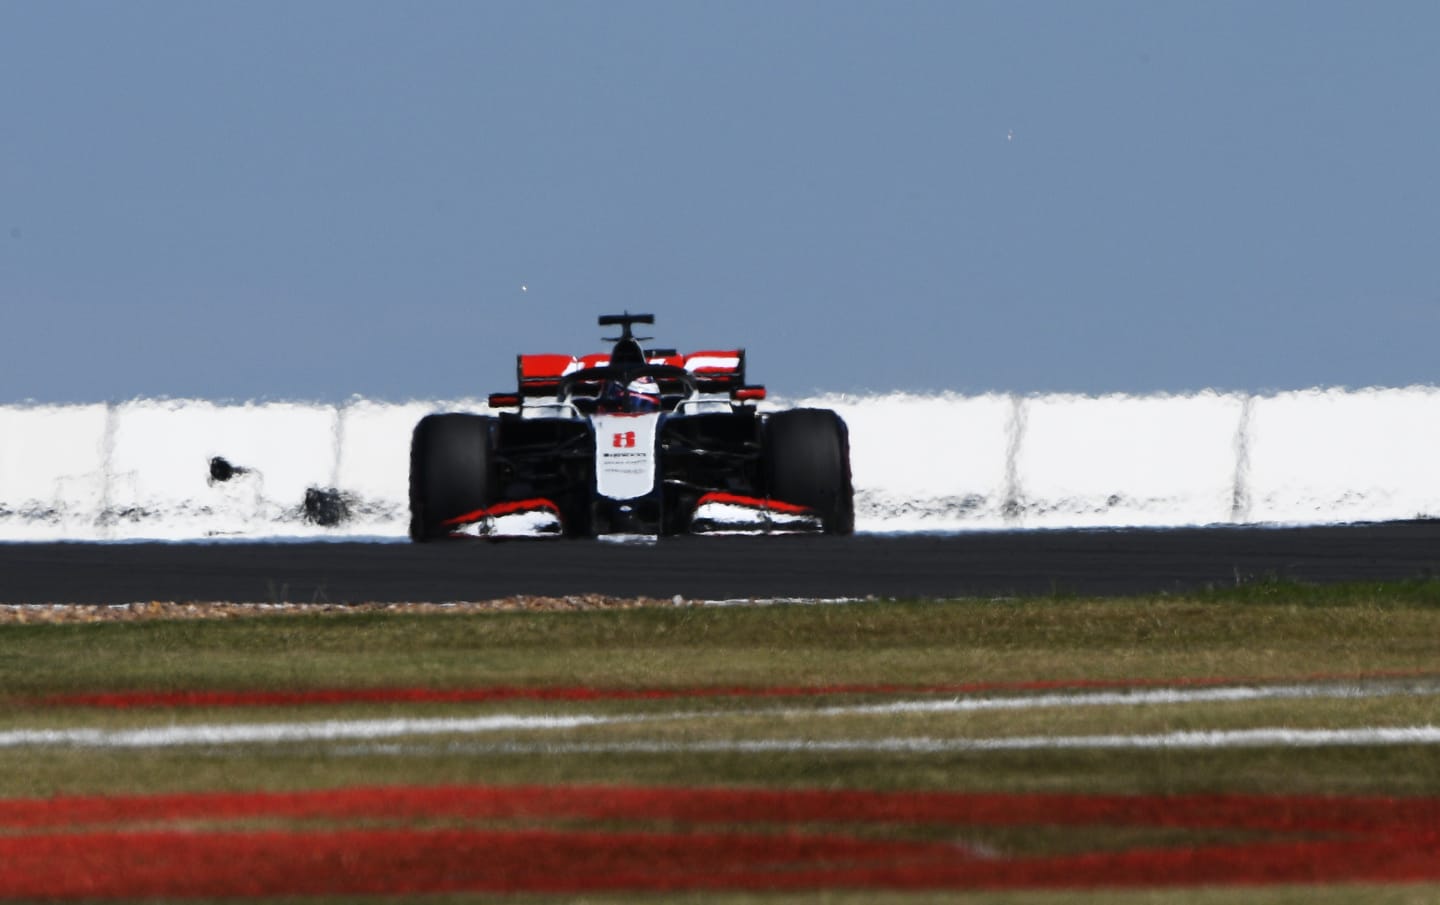 NORTHAMPTON, ENGLAND - AUGUST 07: Romain Grosjean of France driving the (8) Haas F1 Team VF-20 Ferrari drives on track during practice for the F1 70th Anniversary Grand Prix at Silverstone on August 07, 2020 in Northampton, England. (Photo by Rudy Carezzevoli/Getty Images)